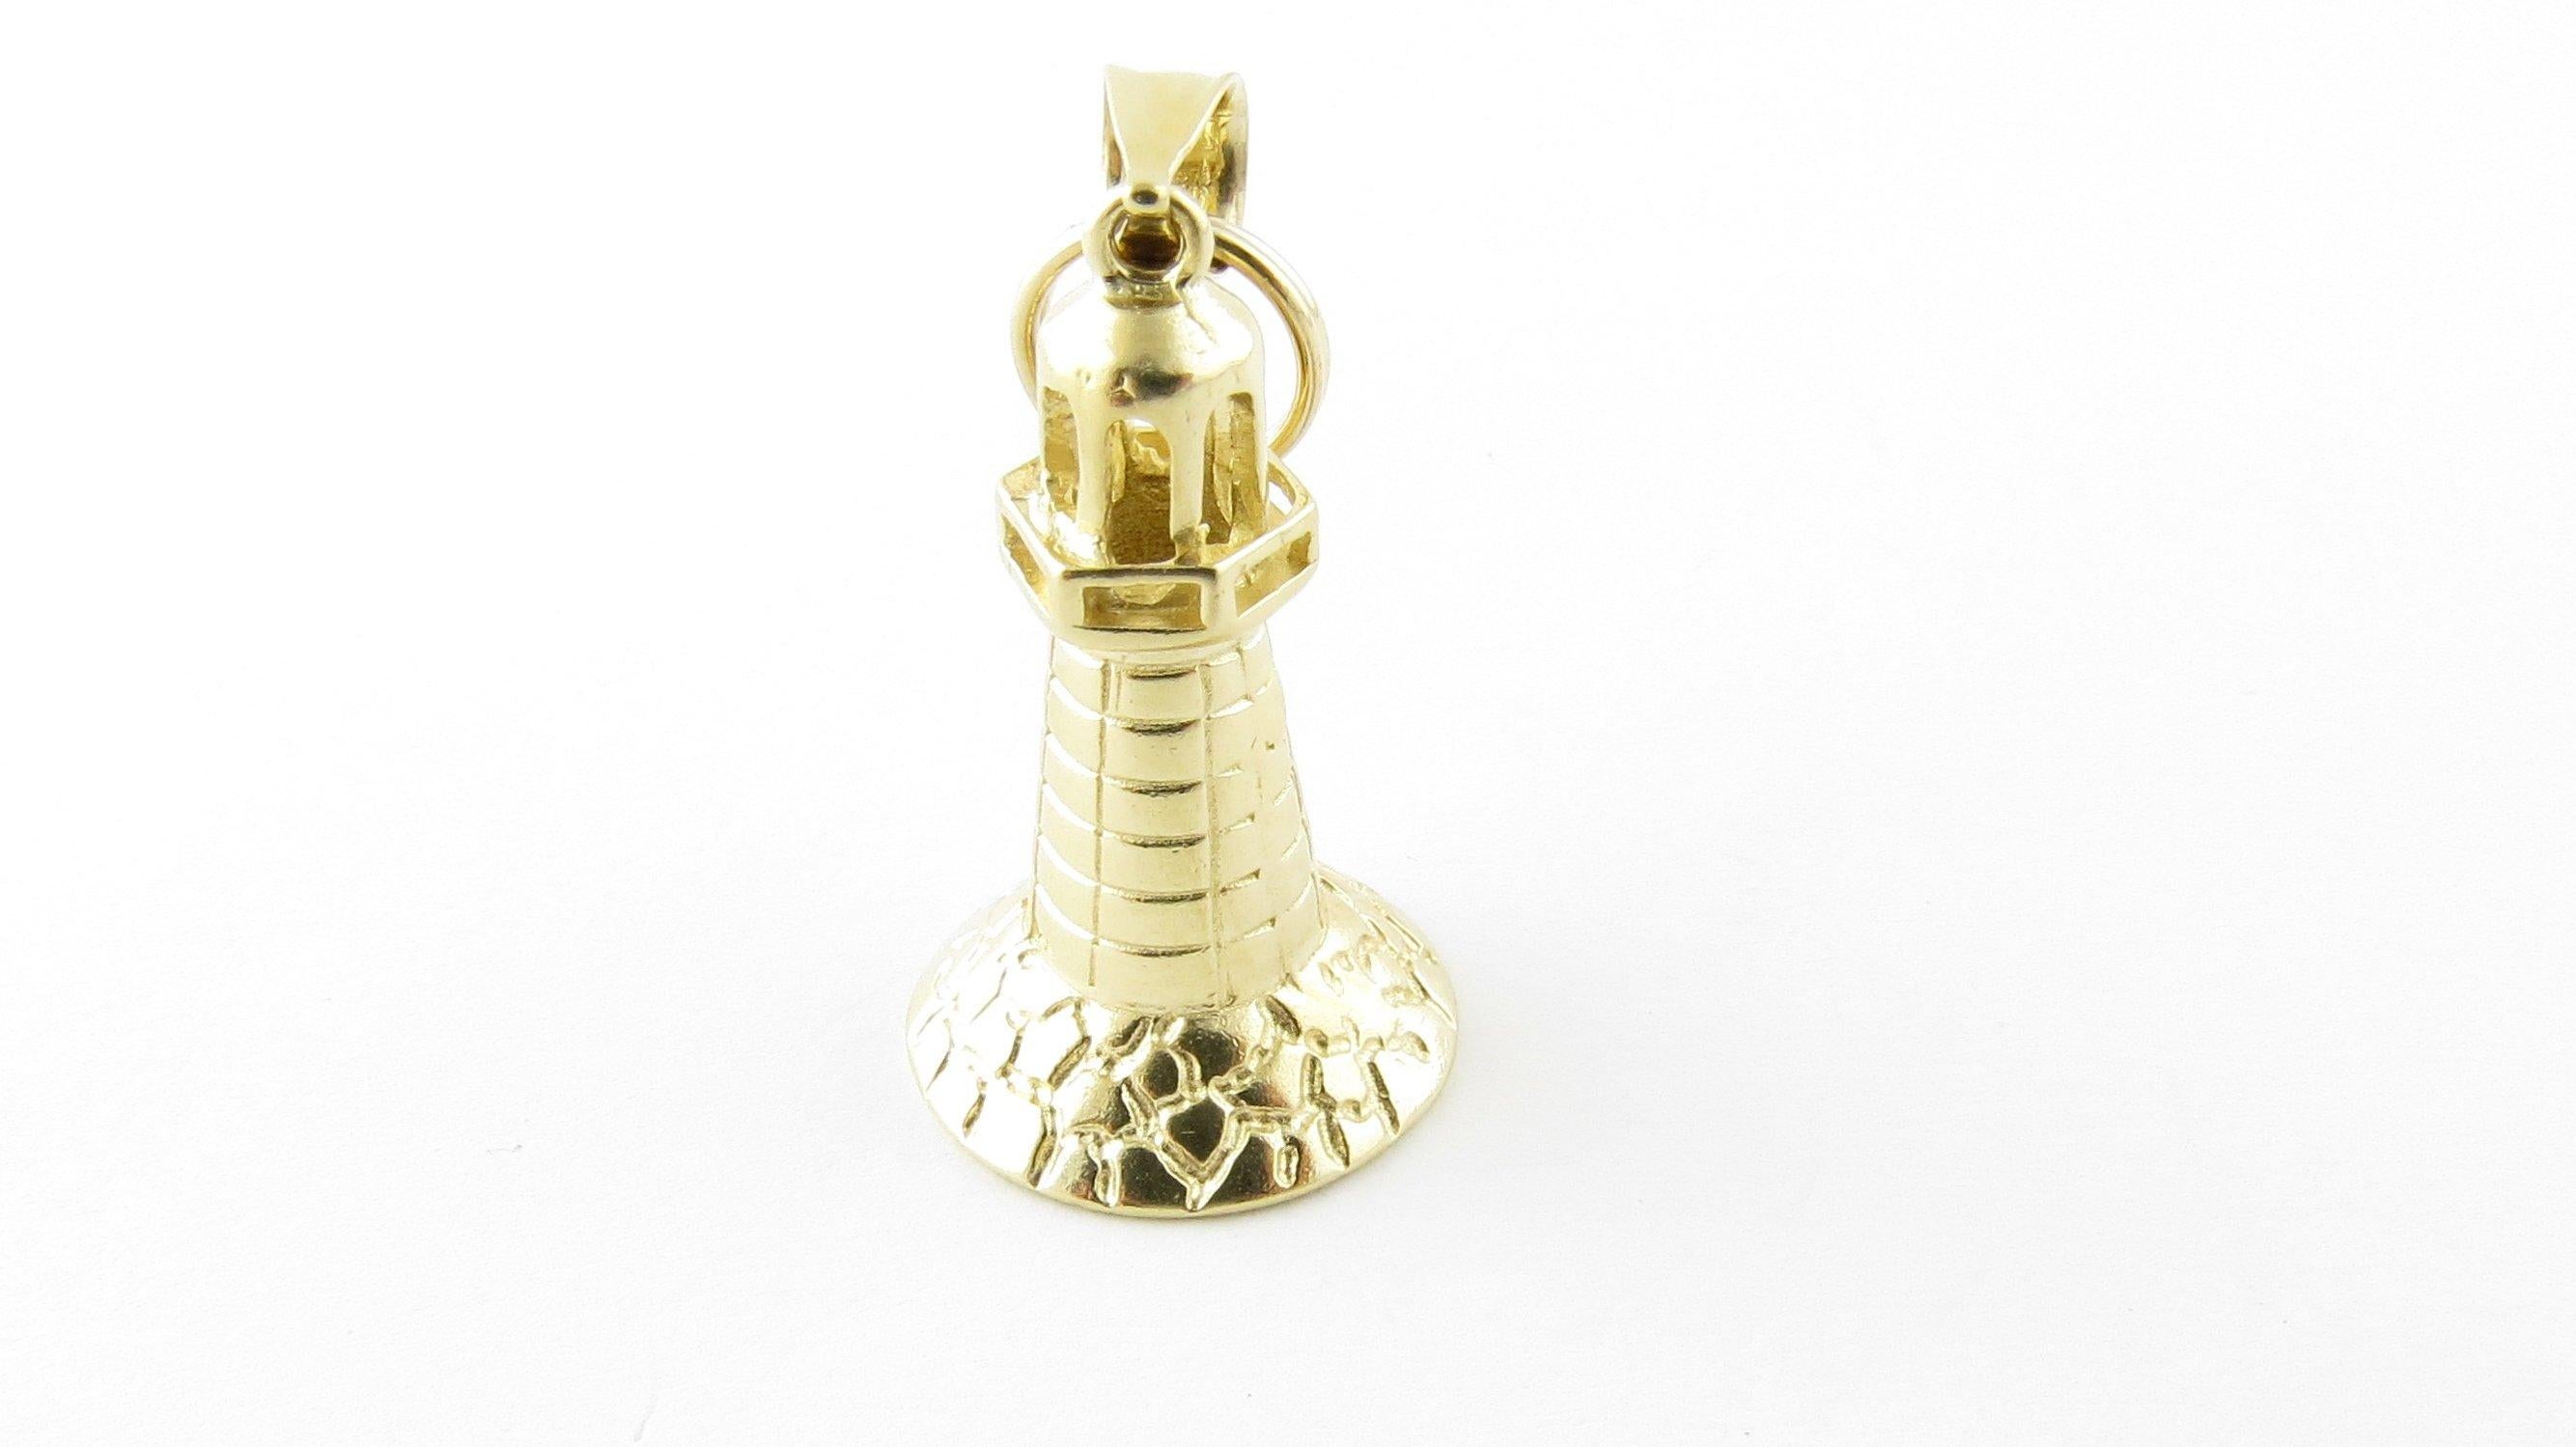 Vintage 14 Karat Yellow Gold Lighthouse Charm. Lighthouses have always symbolize hope and refuge for sailors. This lovely 3D charm features a miniature lighthouse meticulously detailed in 14K yellow gold.
Size: 25 mm x 15 mm (actual charm) Weight: